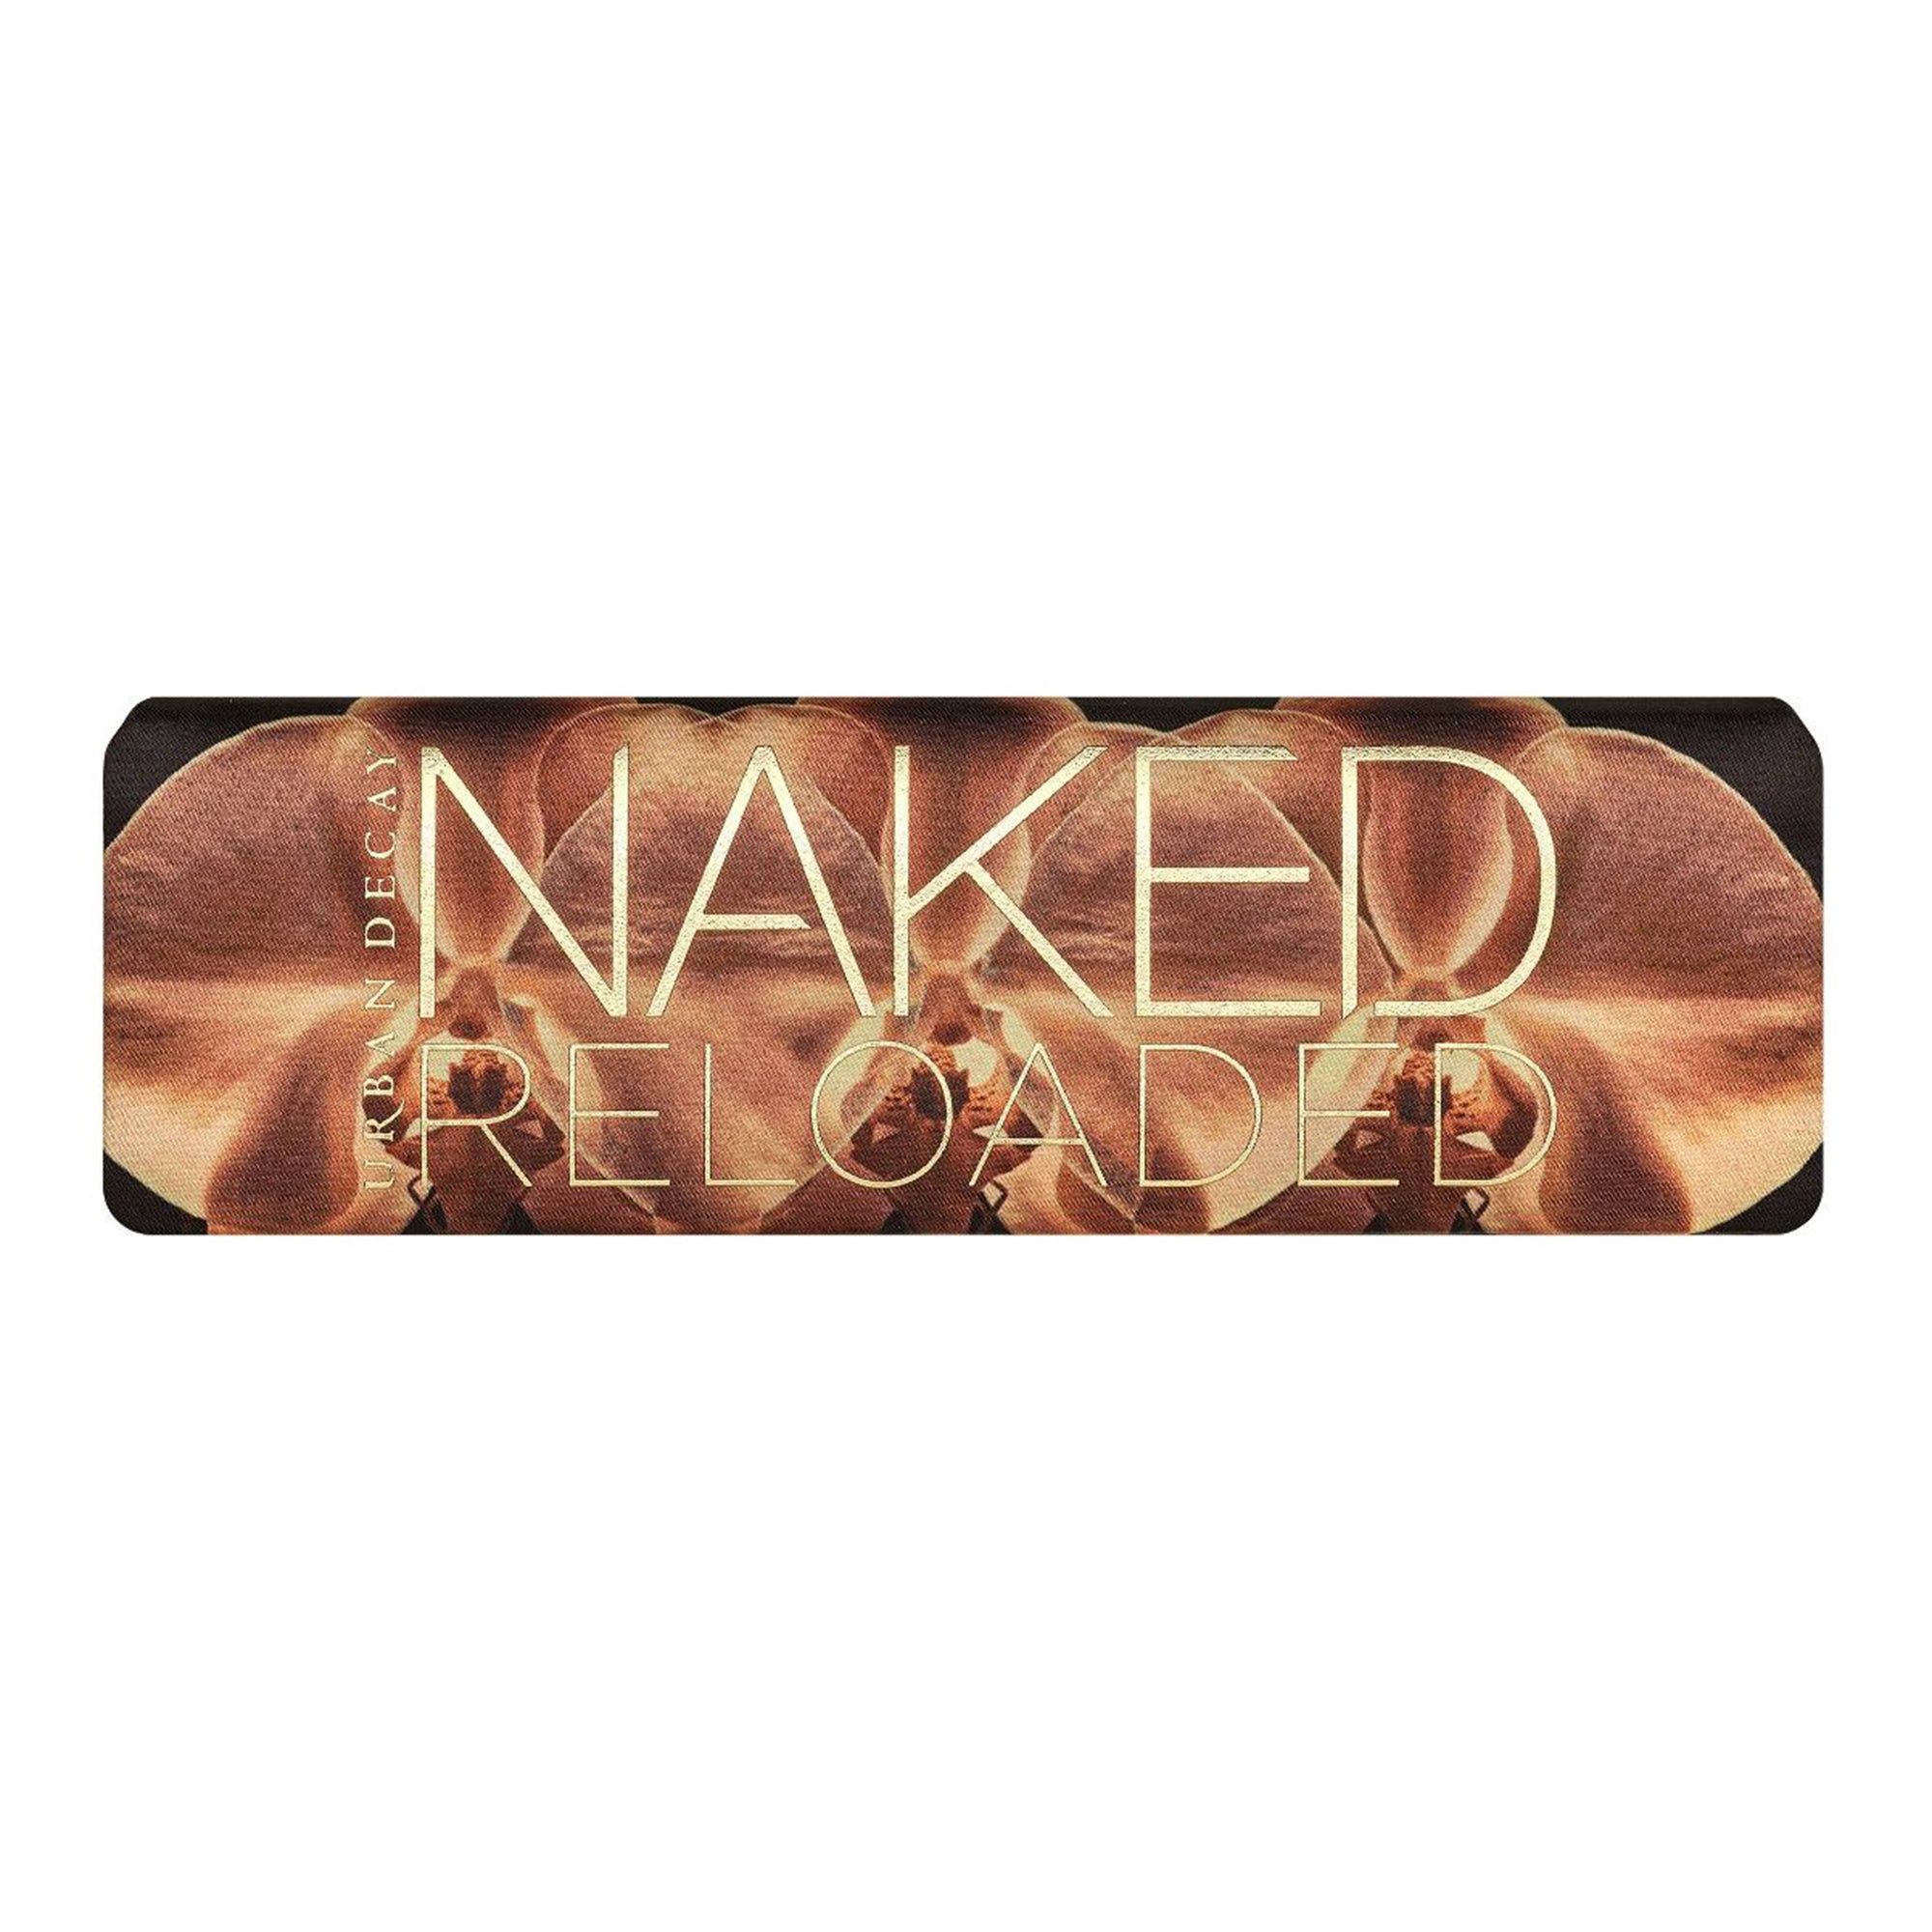 Urban Decay Naked Reloaded Eyeshadow Palette 1ct